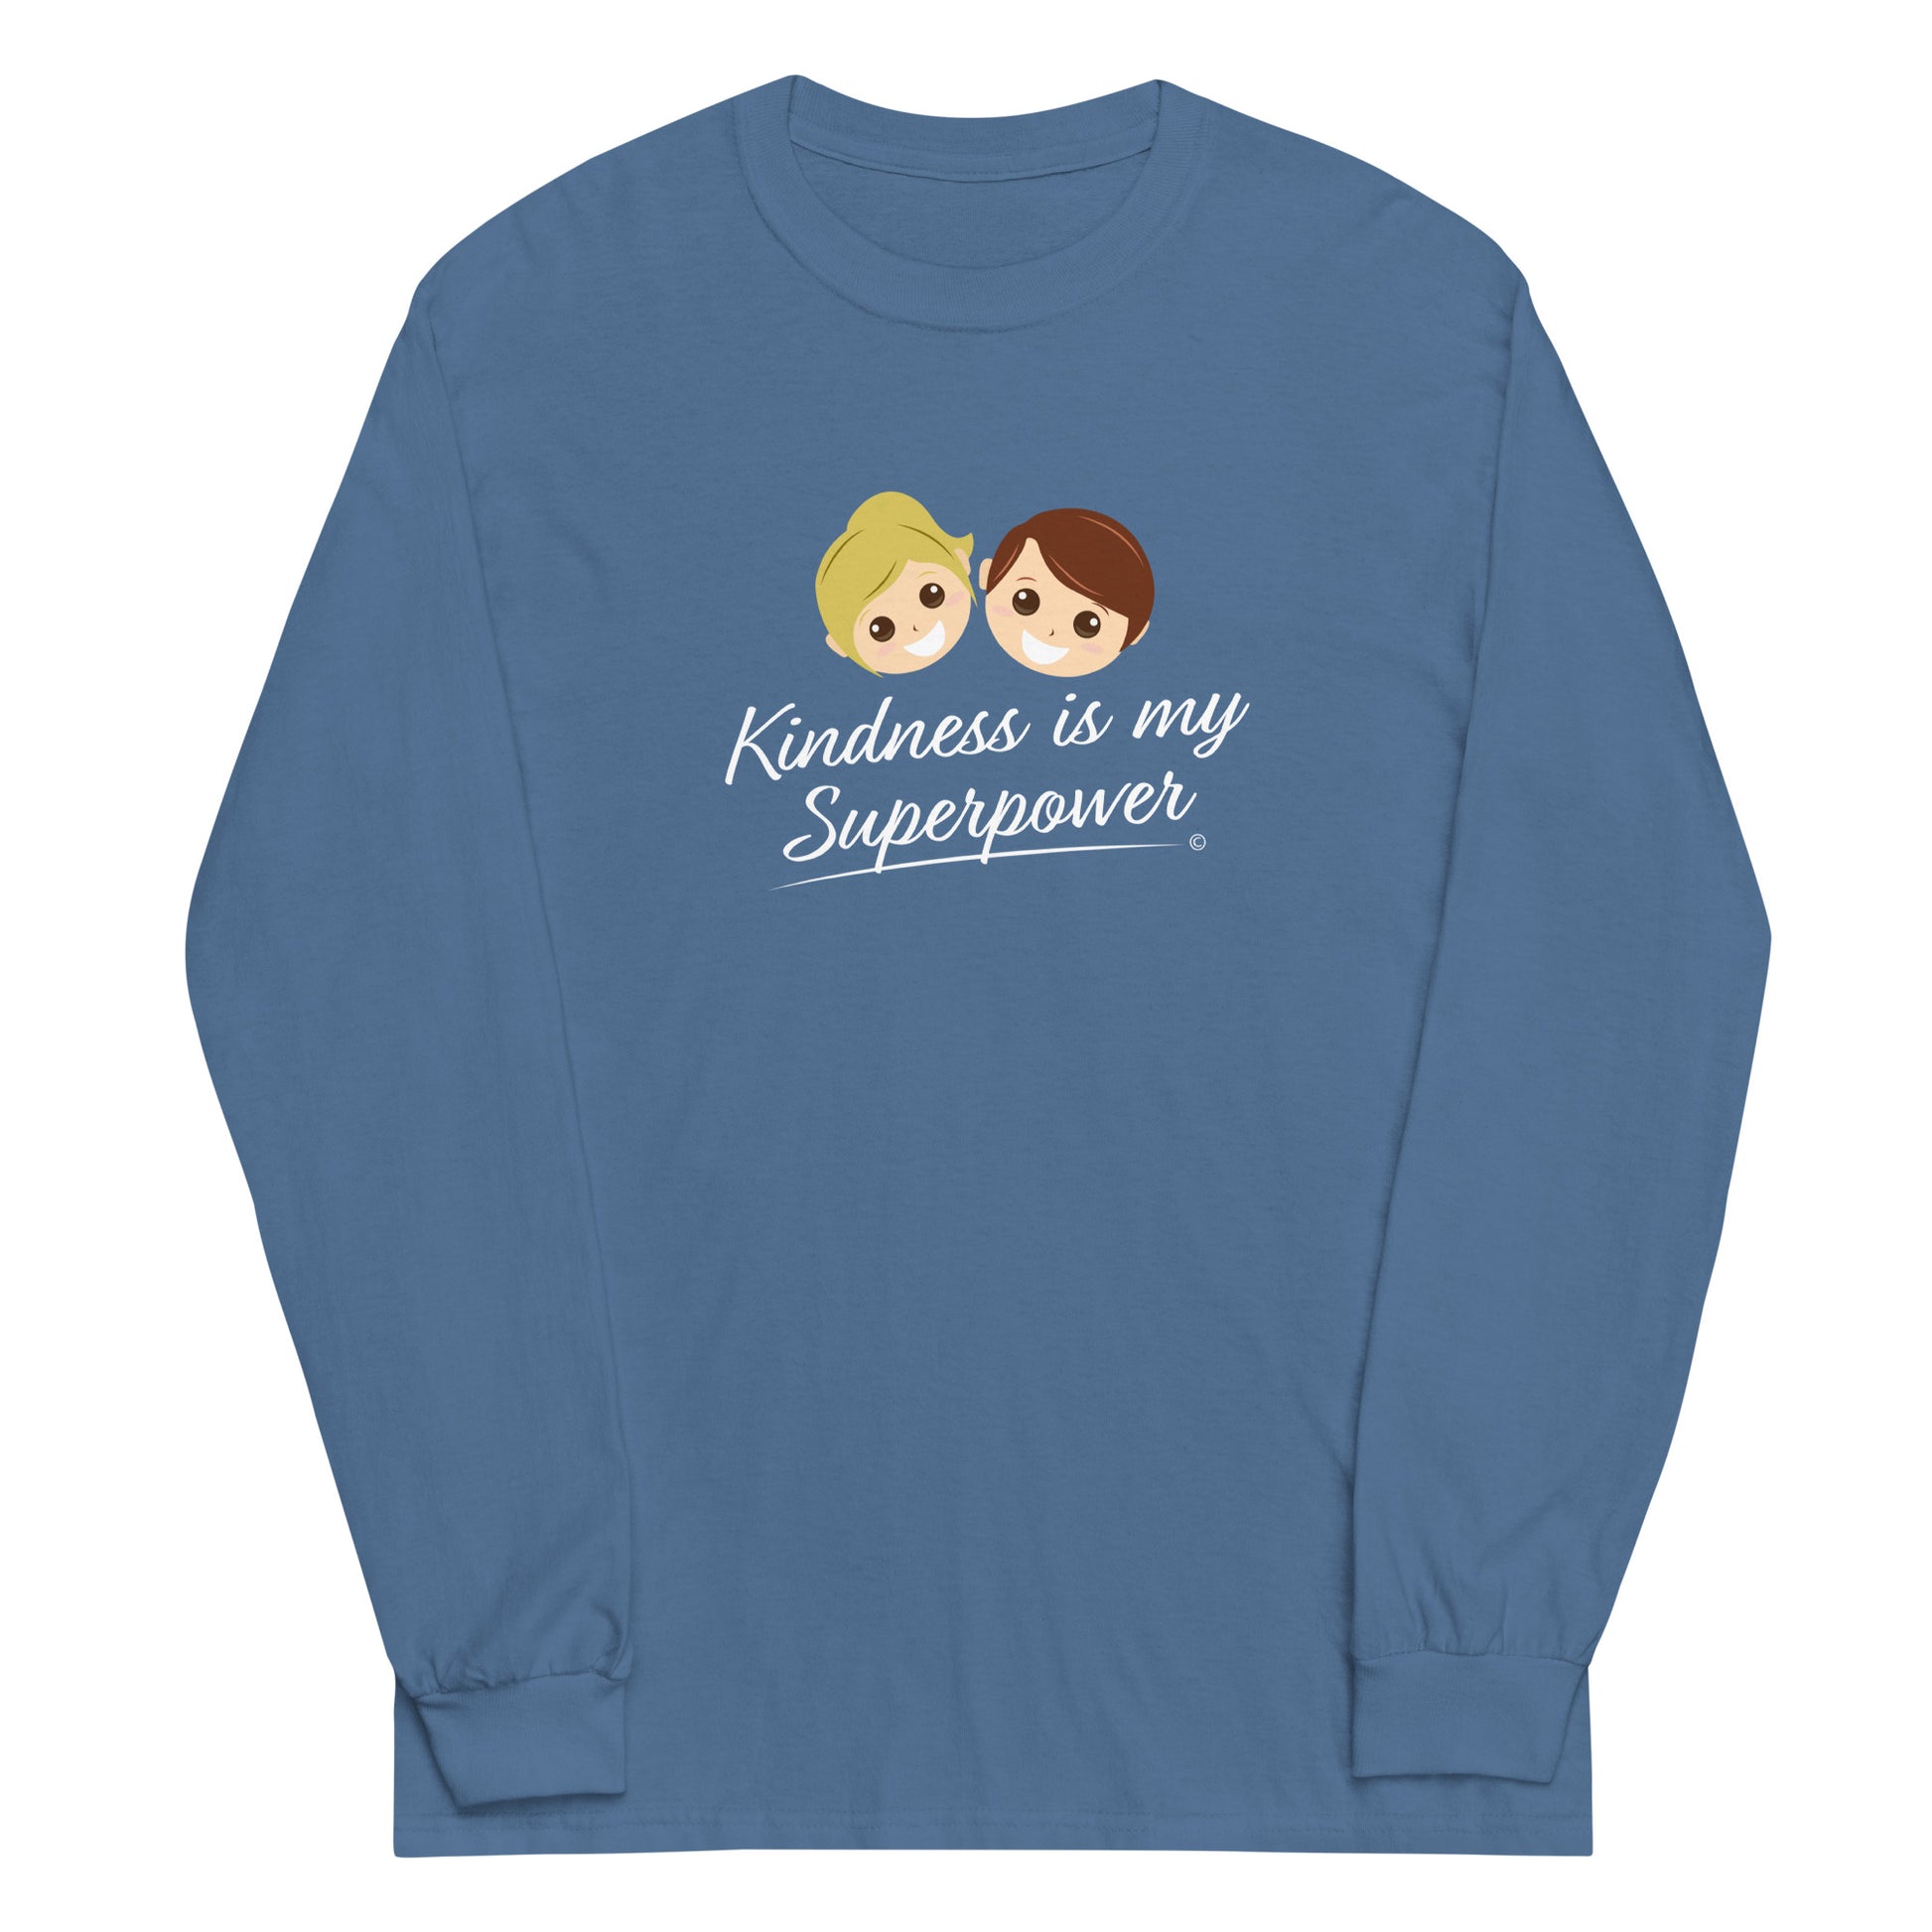 A stylish long sleeve shirt in indigo blue featuring the empowering quote 'Kindness is my Superpower' in bold lettering.